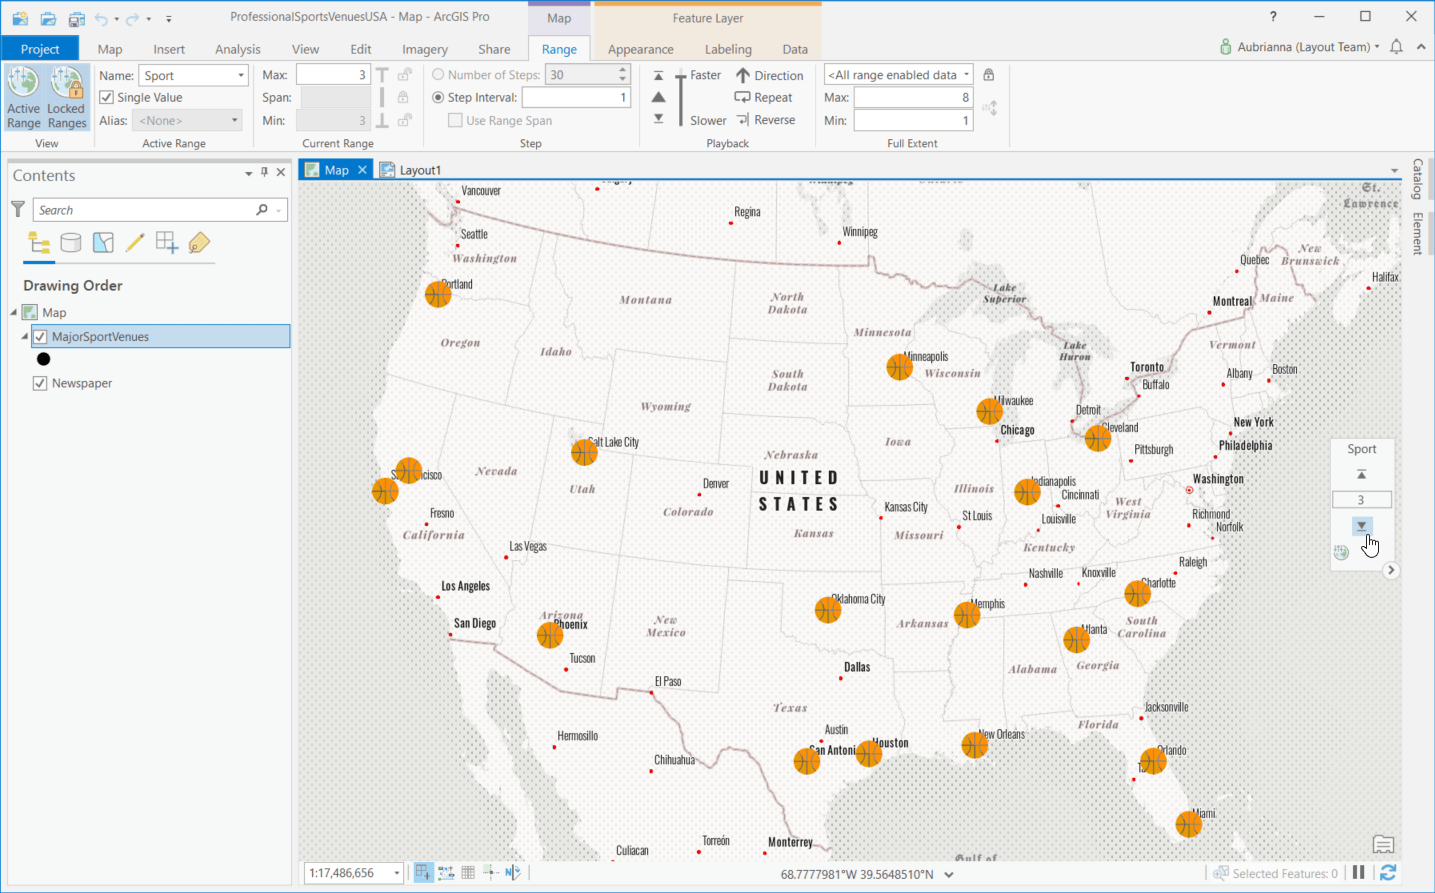 Map of sports stadiums in the US with range enabled. The range is set to 3, only showing basketball stadiums